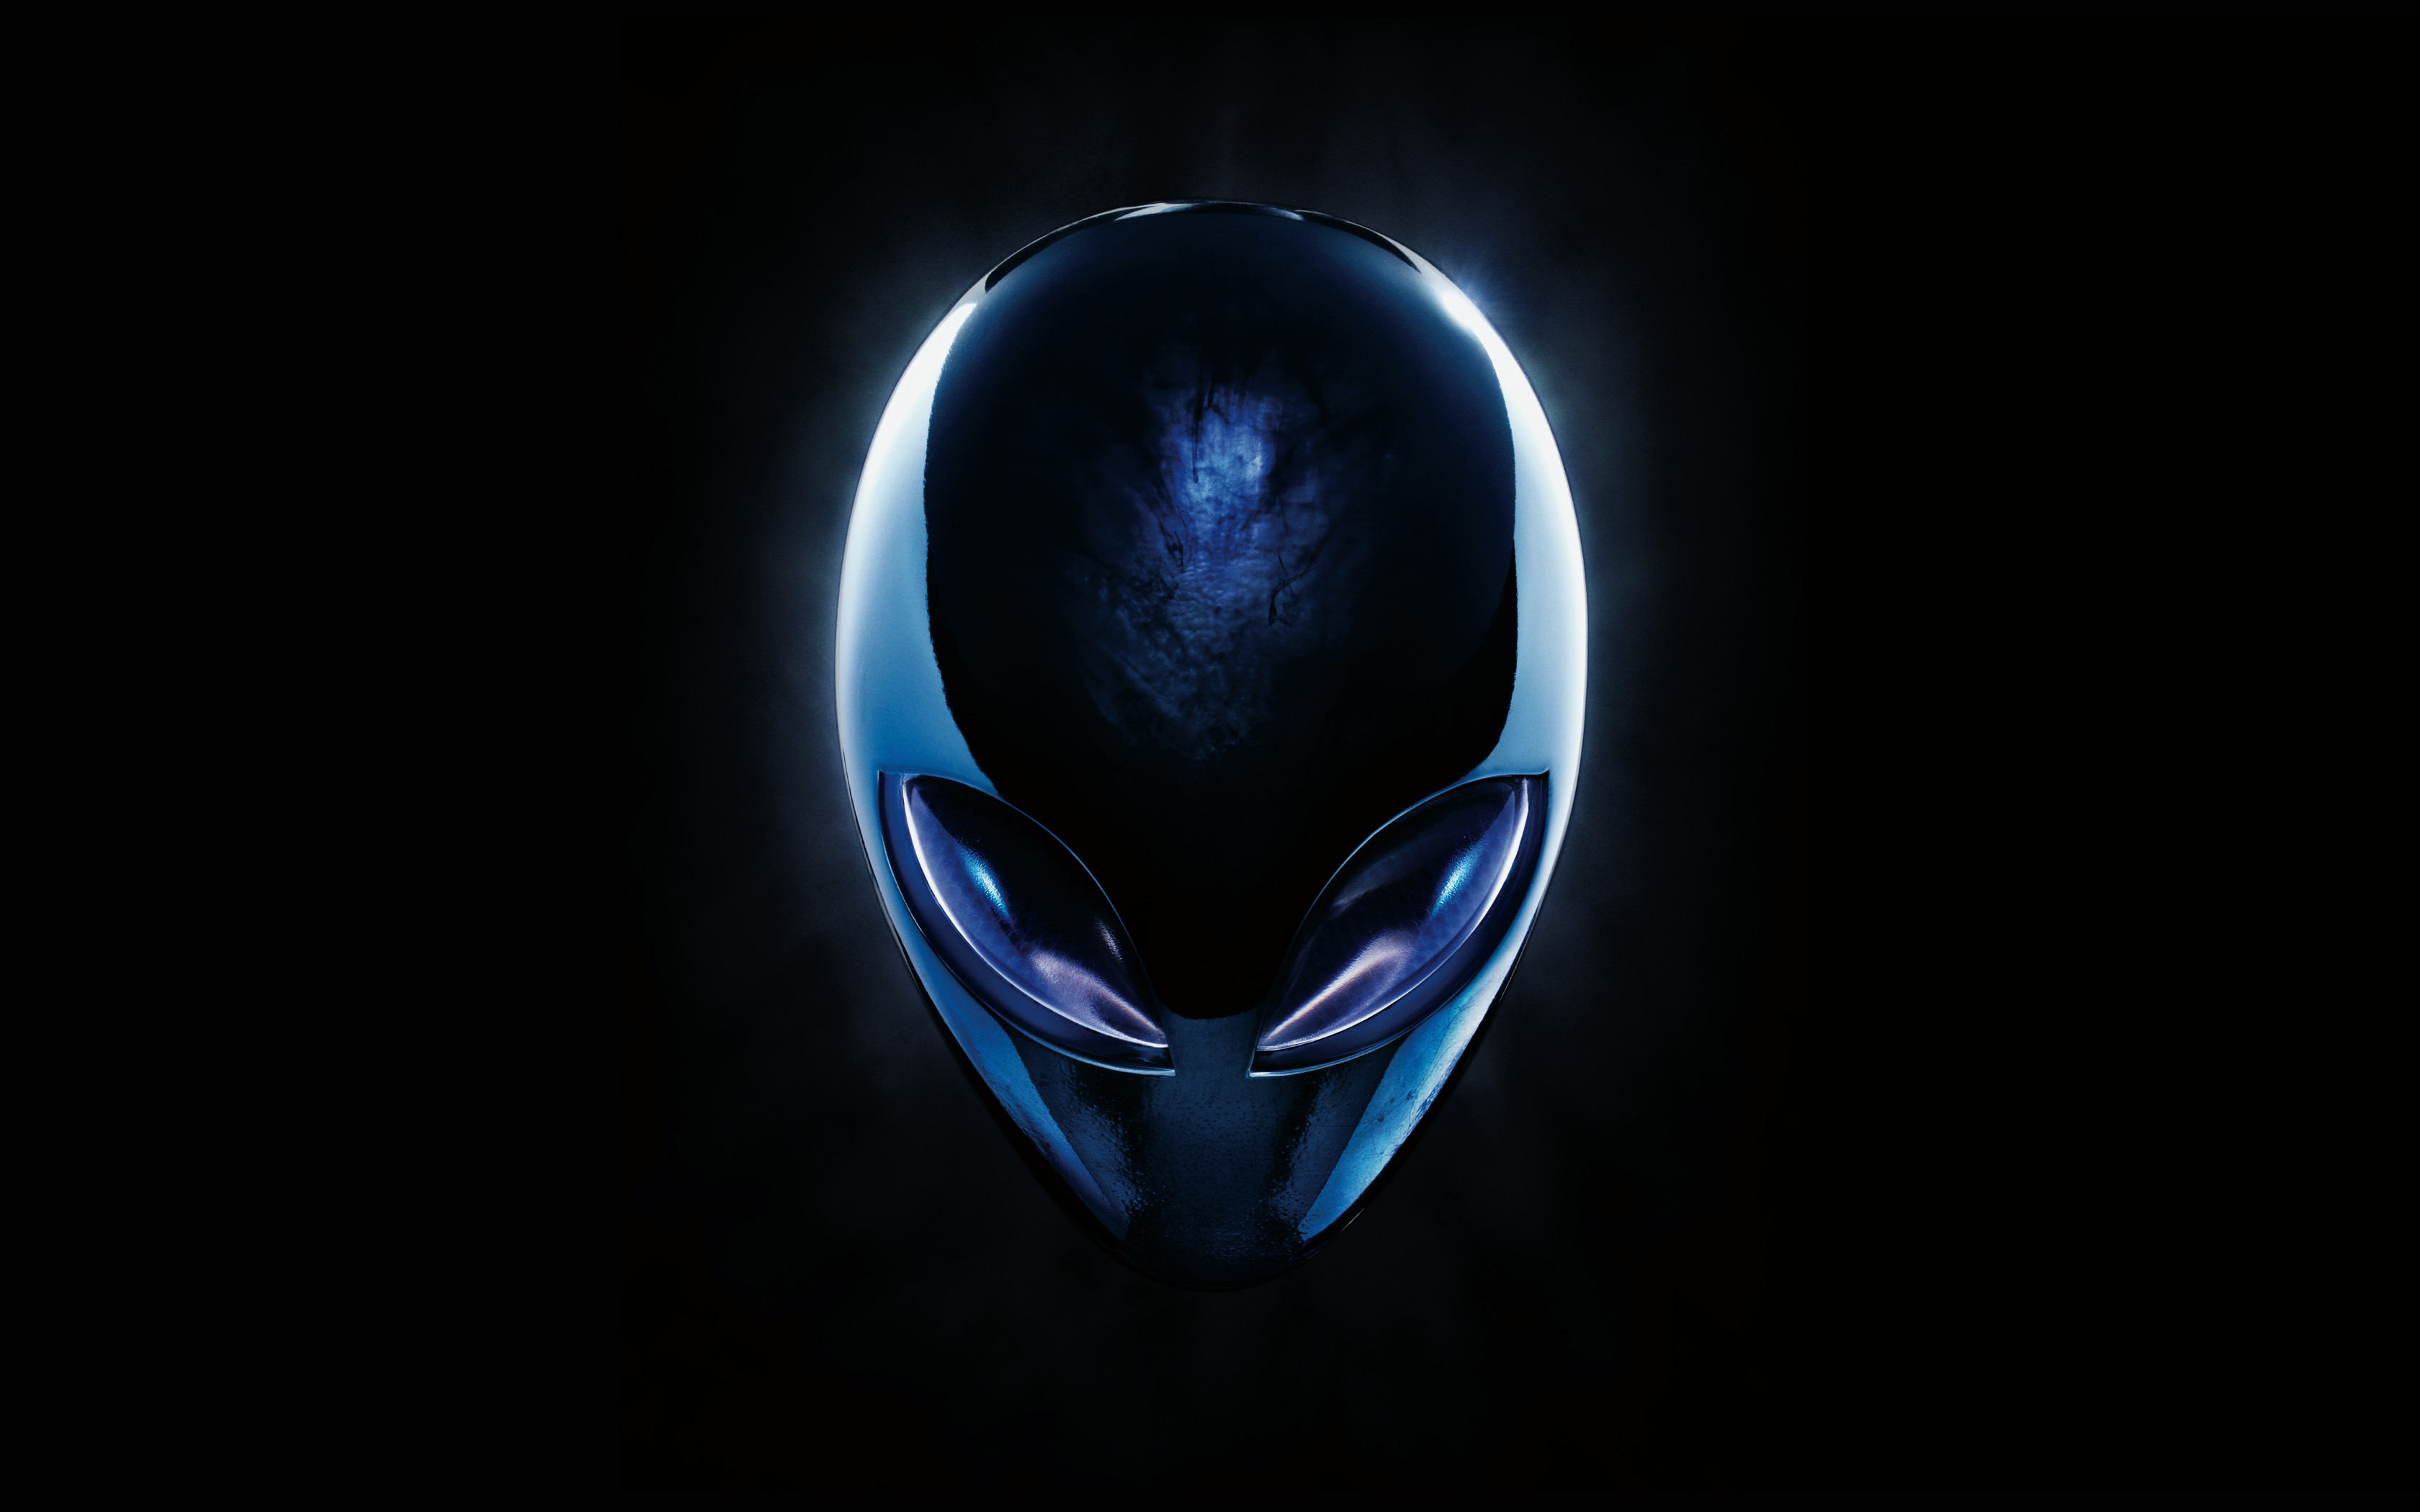 3360x2100 Alienware Desktop Backgrounds can finish off the look of your Alienware Fx  Themes by complimenting the colors.